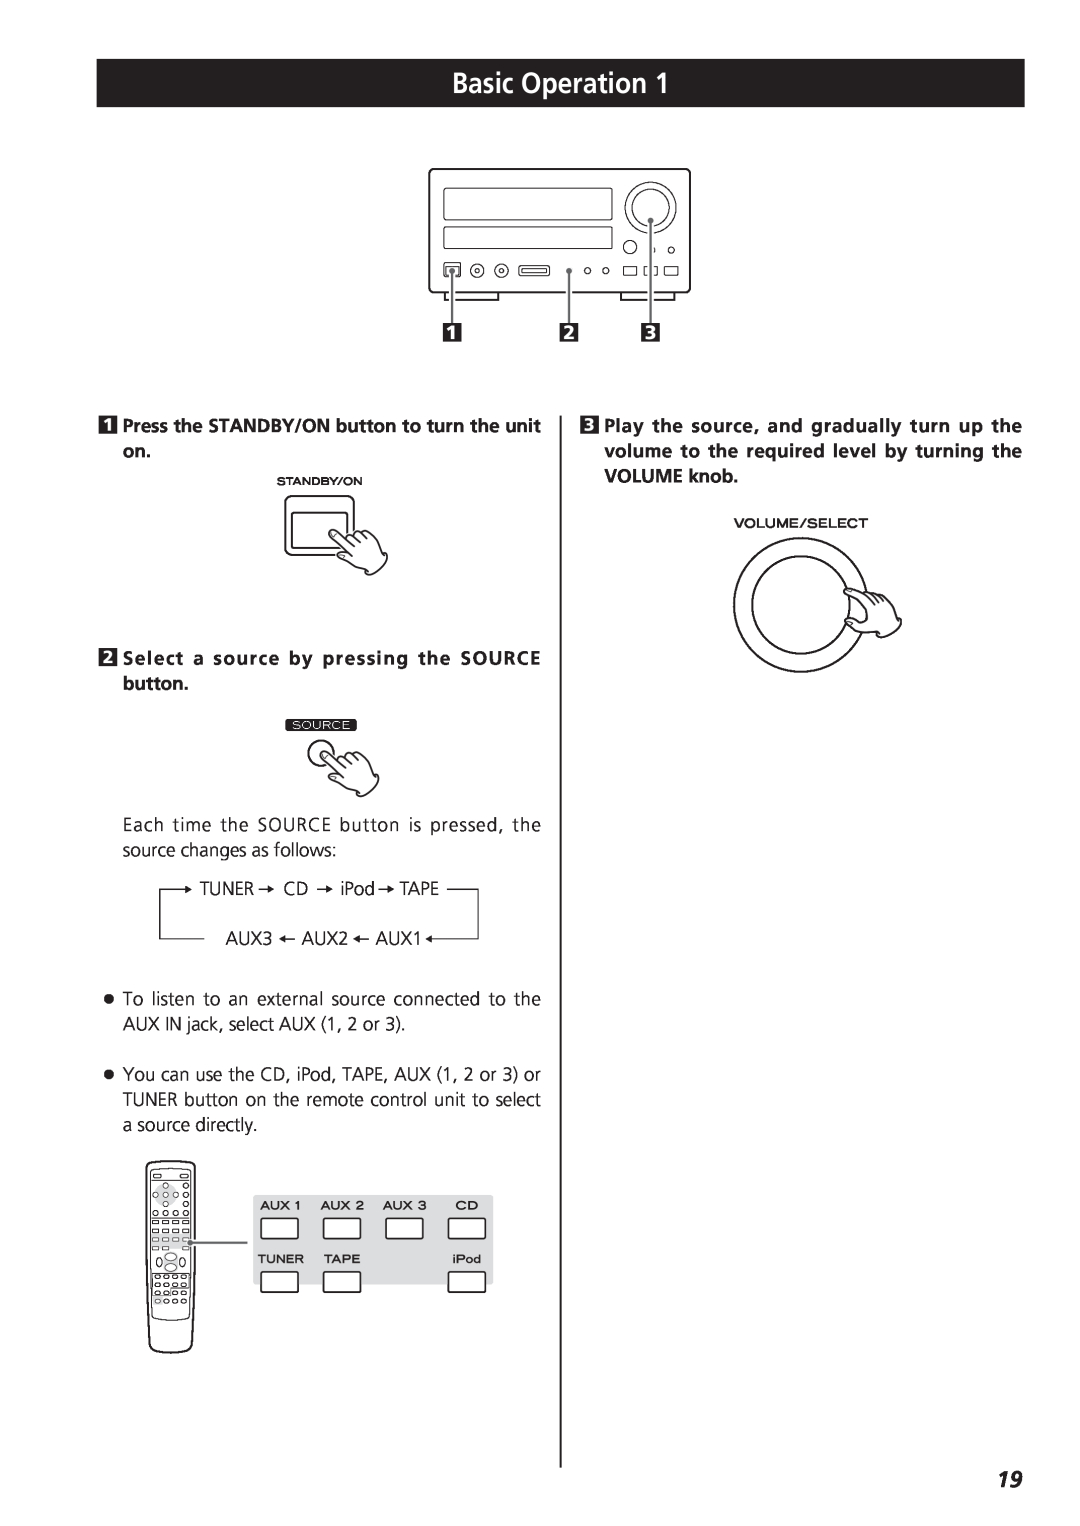 Teac CR-H227I owner manual Basic Operation, Press the STANDBY/ON button to turn the unit on 